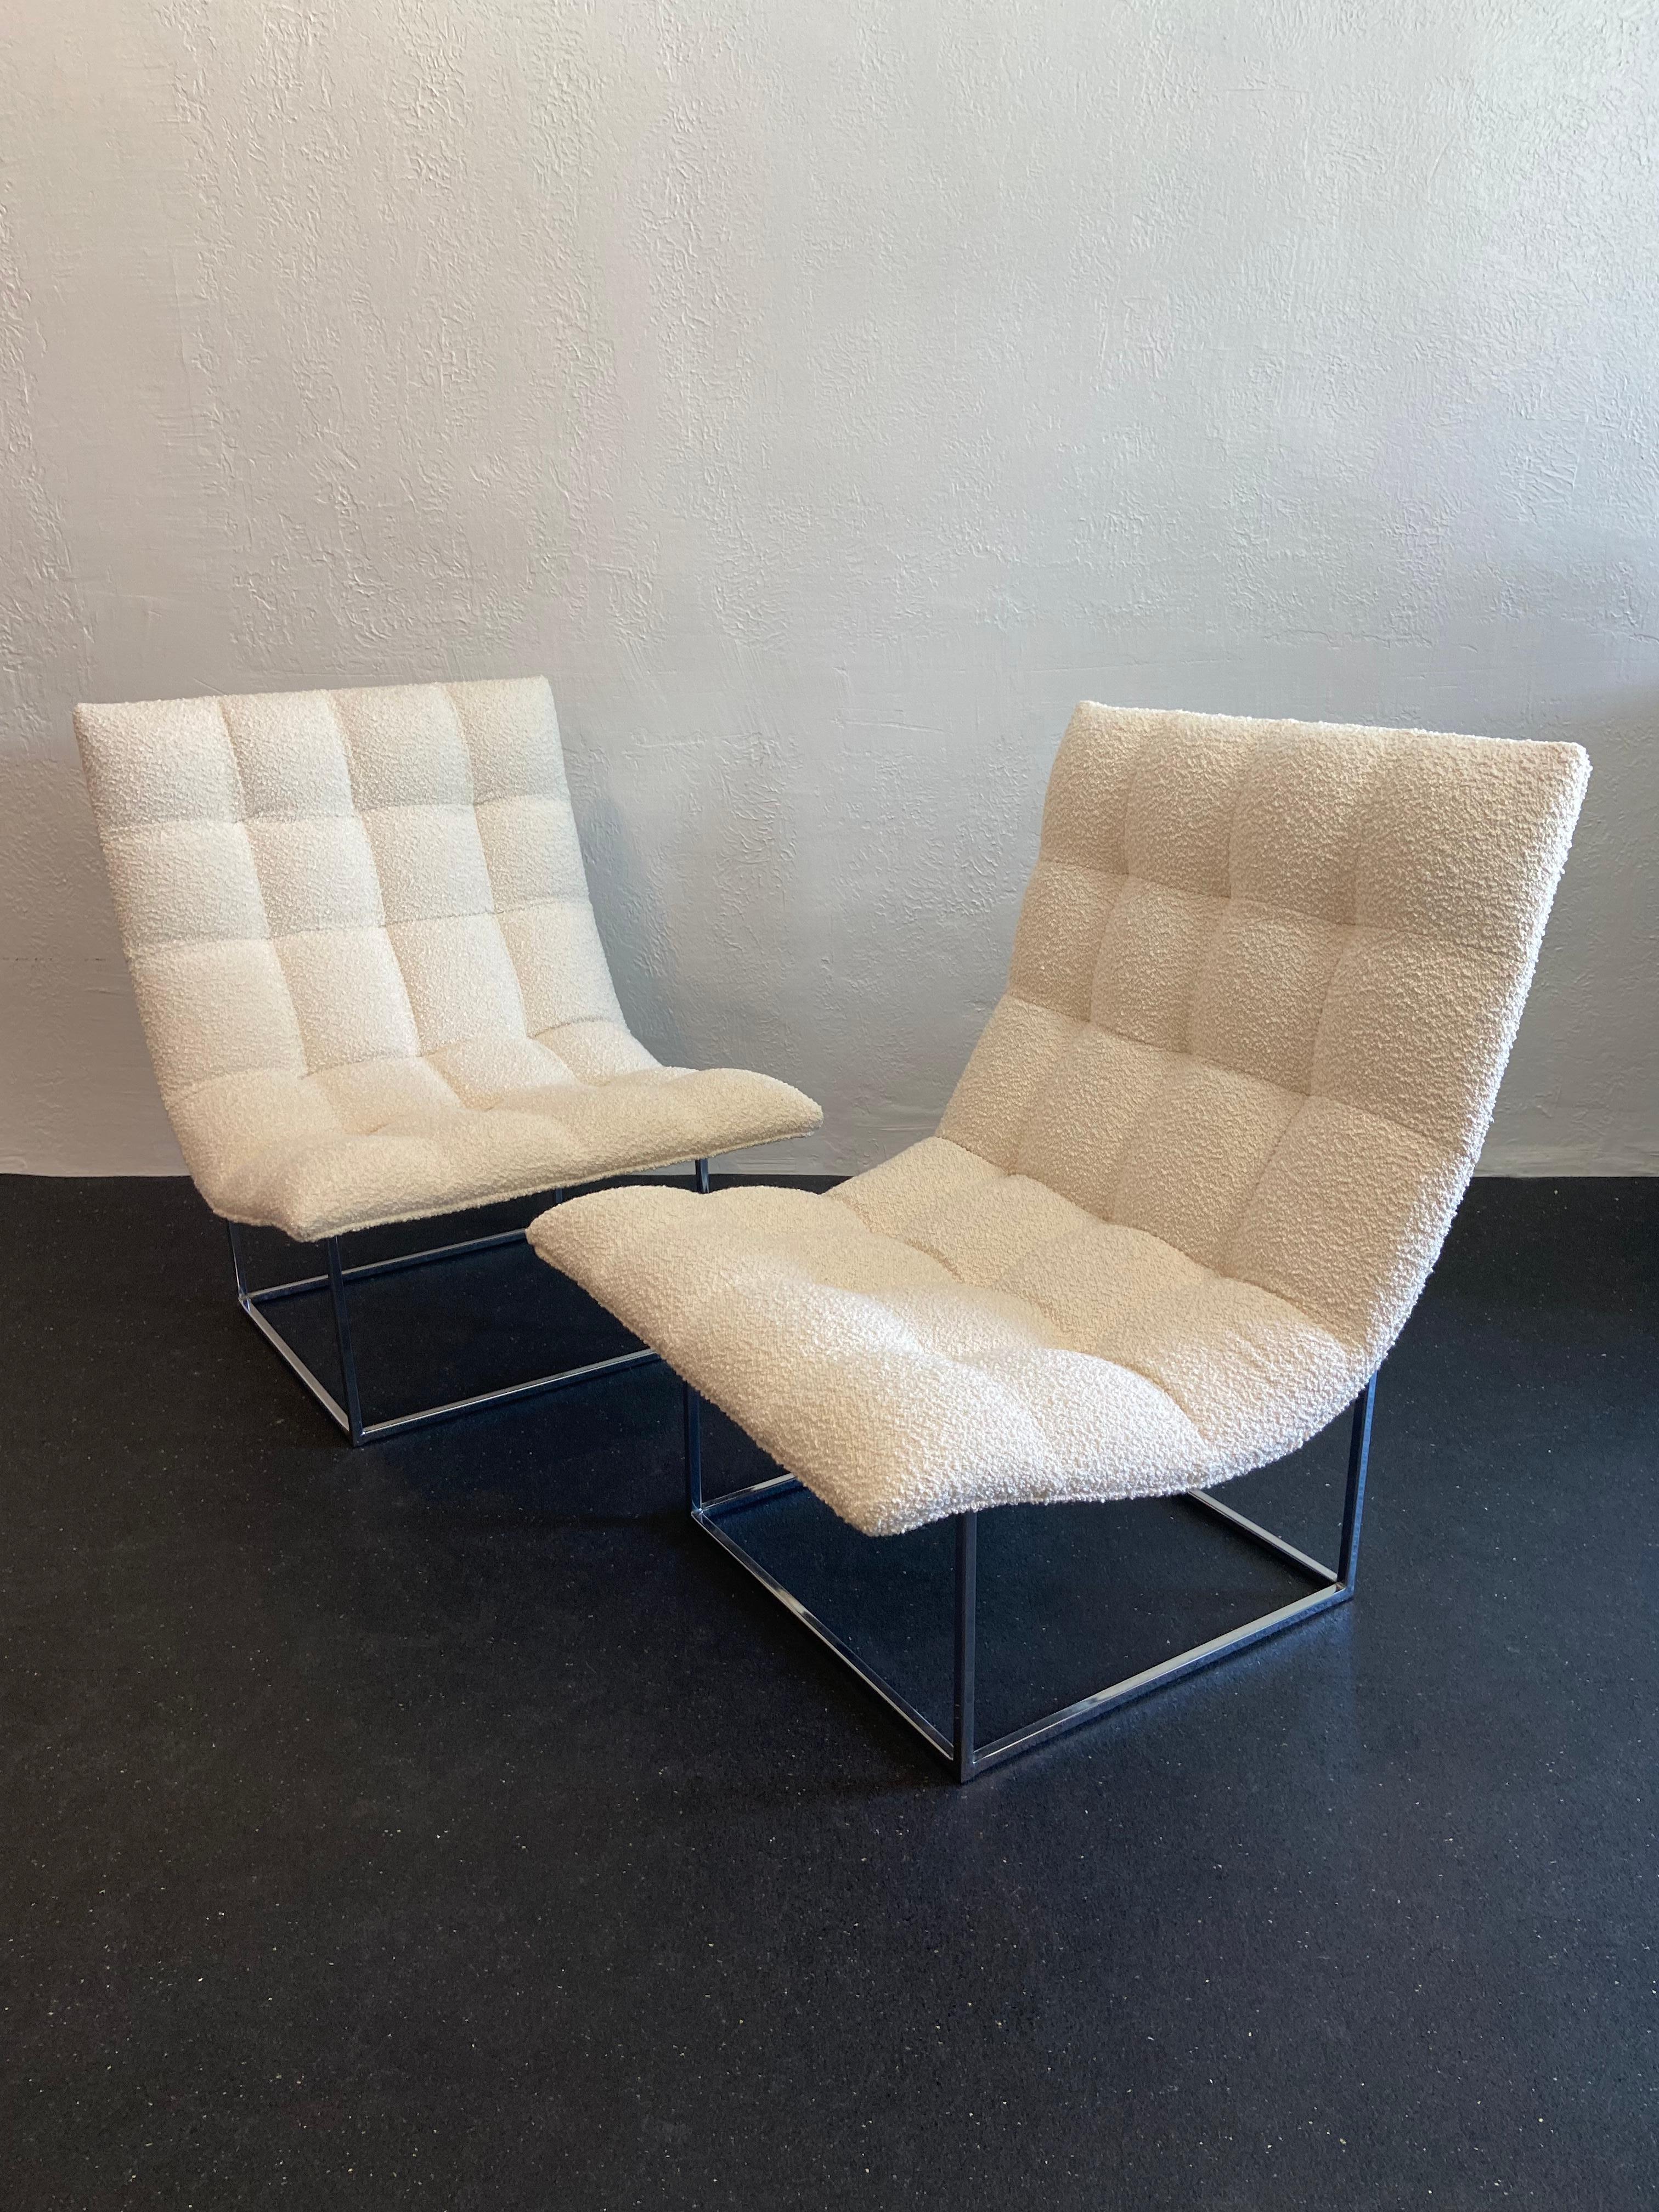 Milo Baughman For Thayer Coggin Scoop Lounge Chairs- A Pair In Good Condition For Sale In West Palm Beach, FL